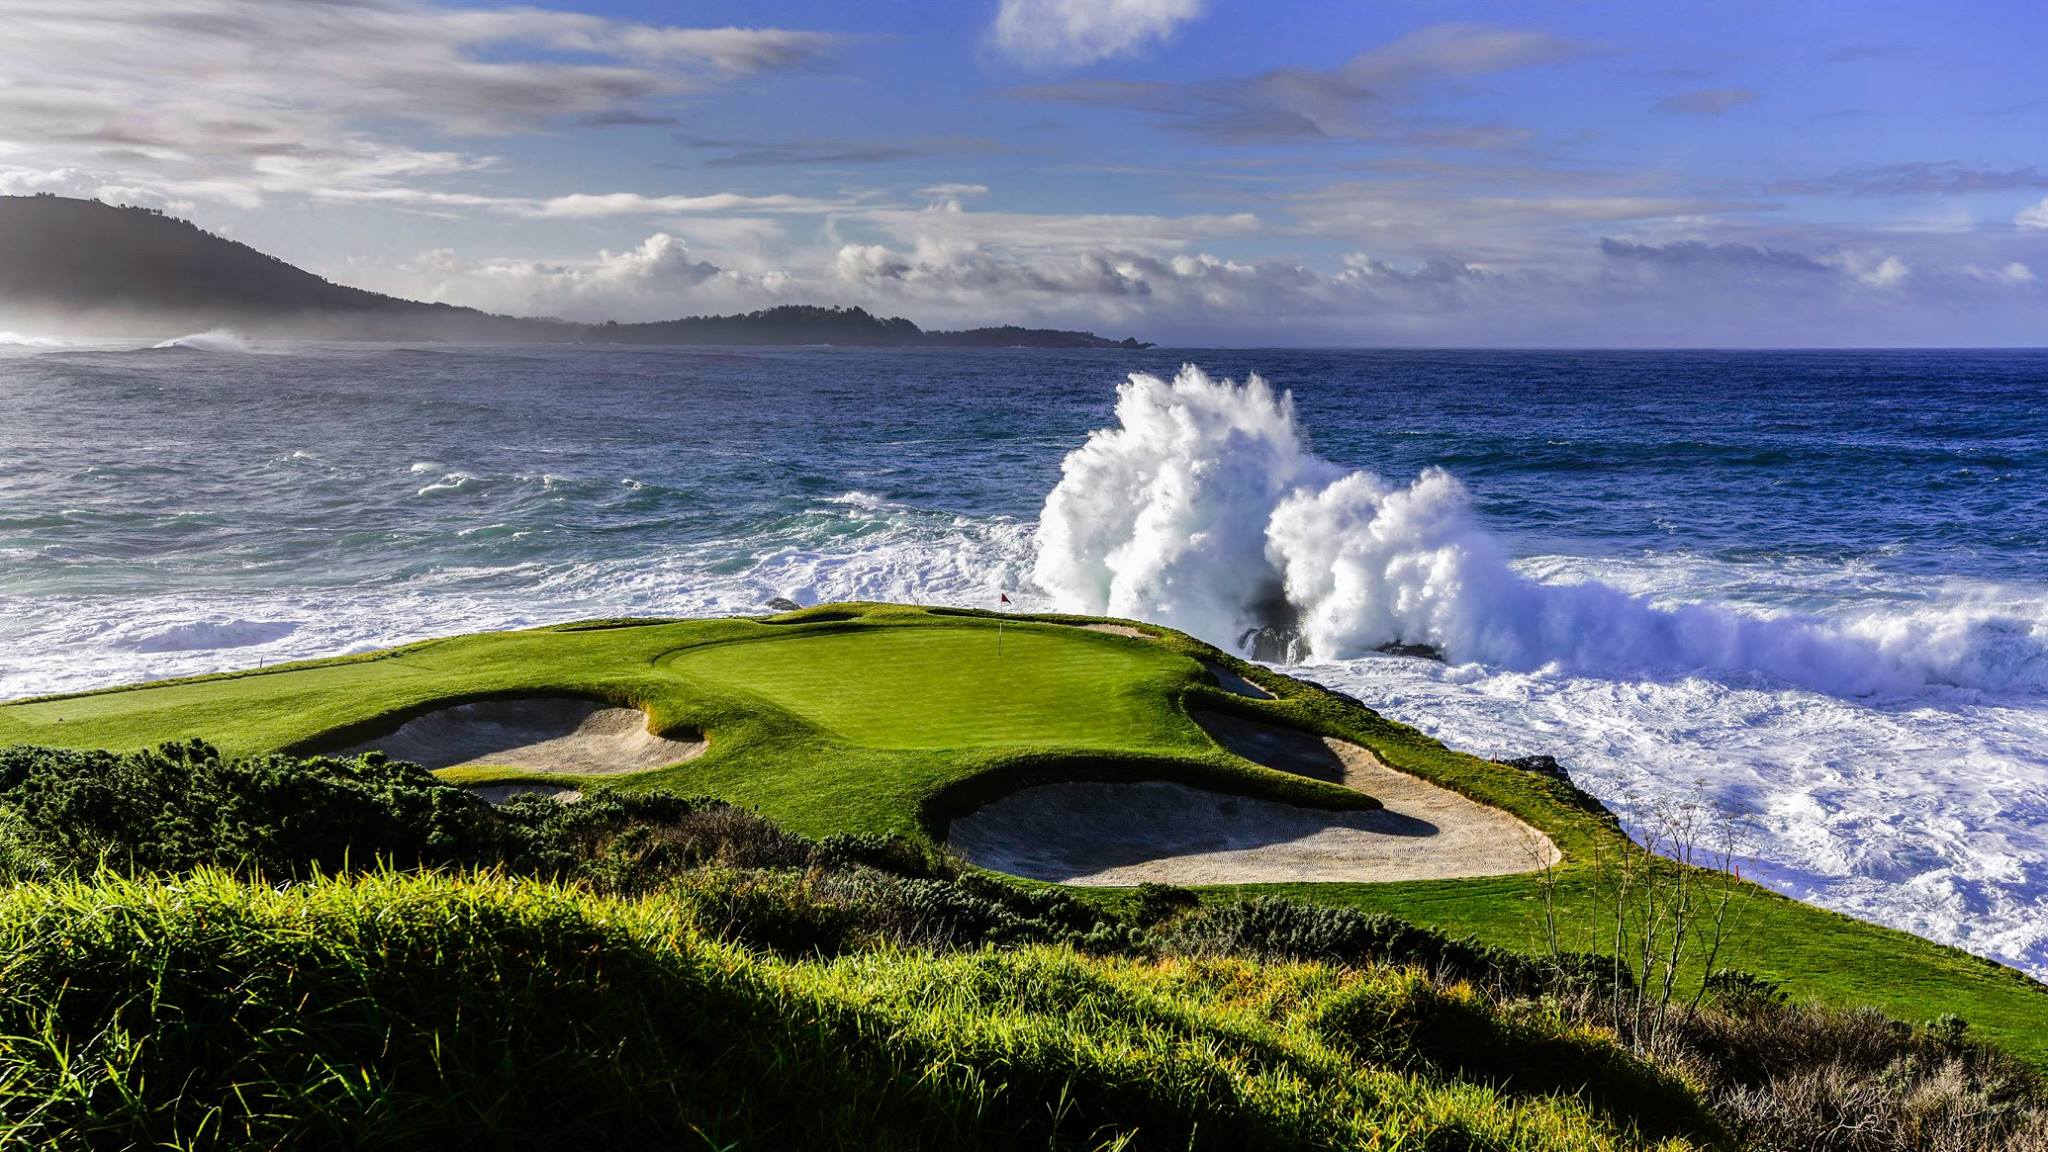 Pebble Beach Golf Wallpapers Top Free Pebble Beach Golf Backgrounds